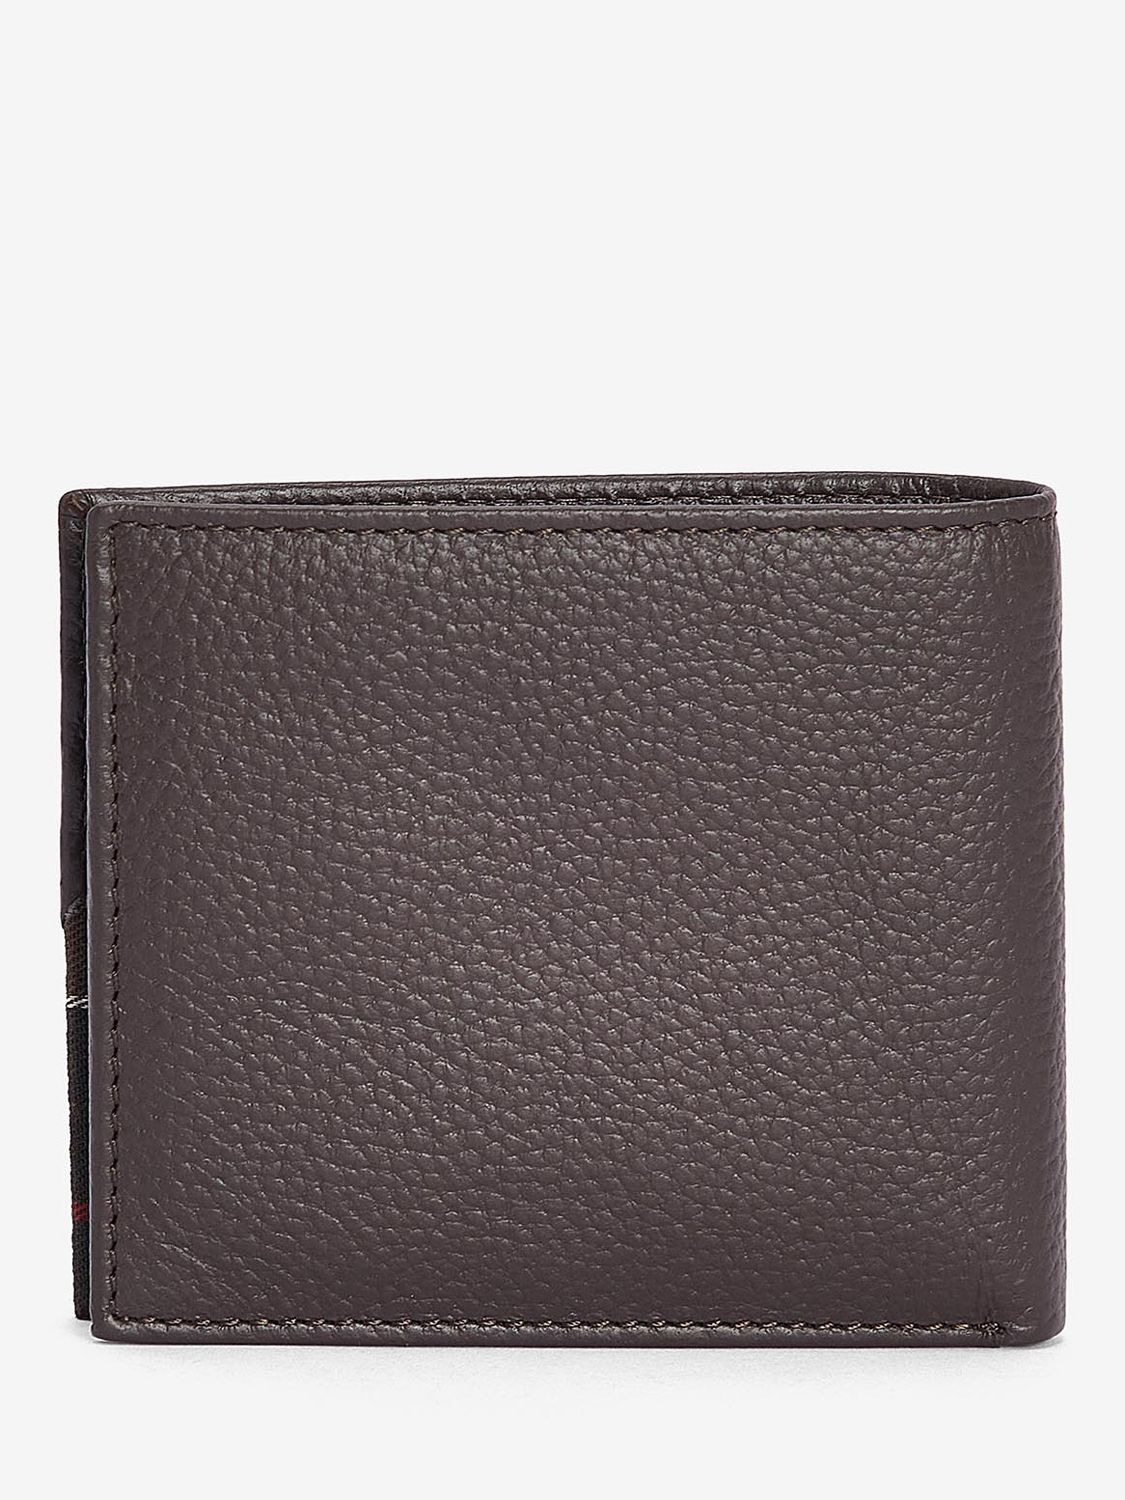 Barbour Tabert Leather Wallet, Chocolate at John Lewis & Partners